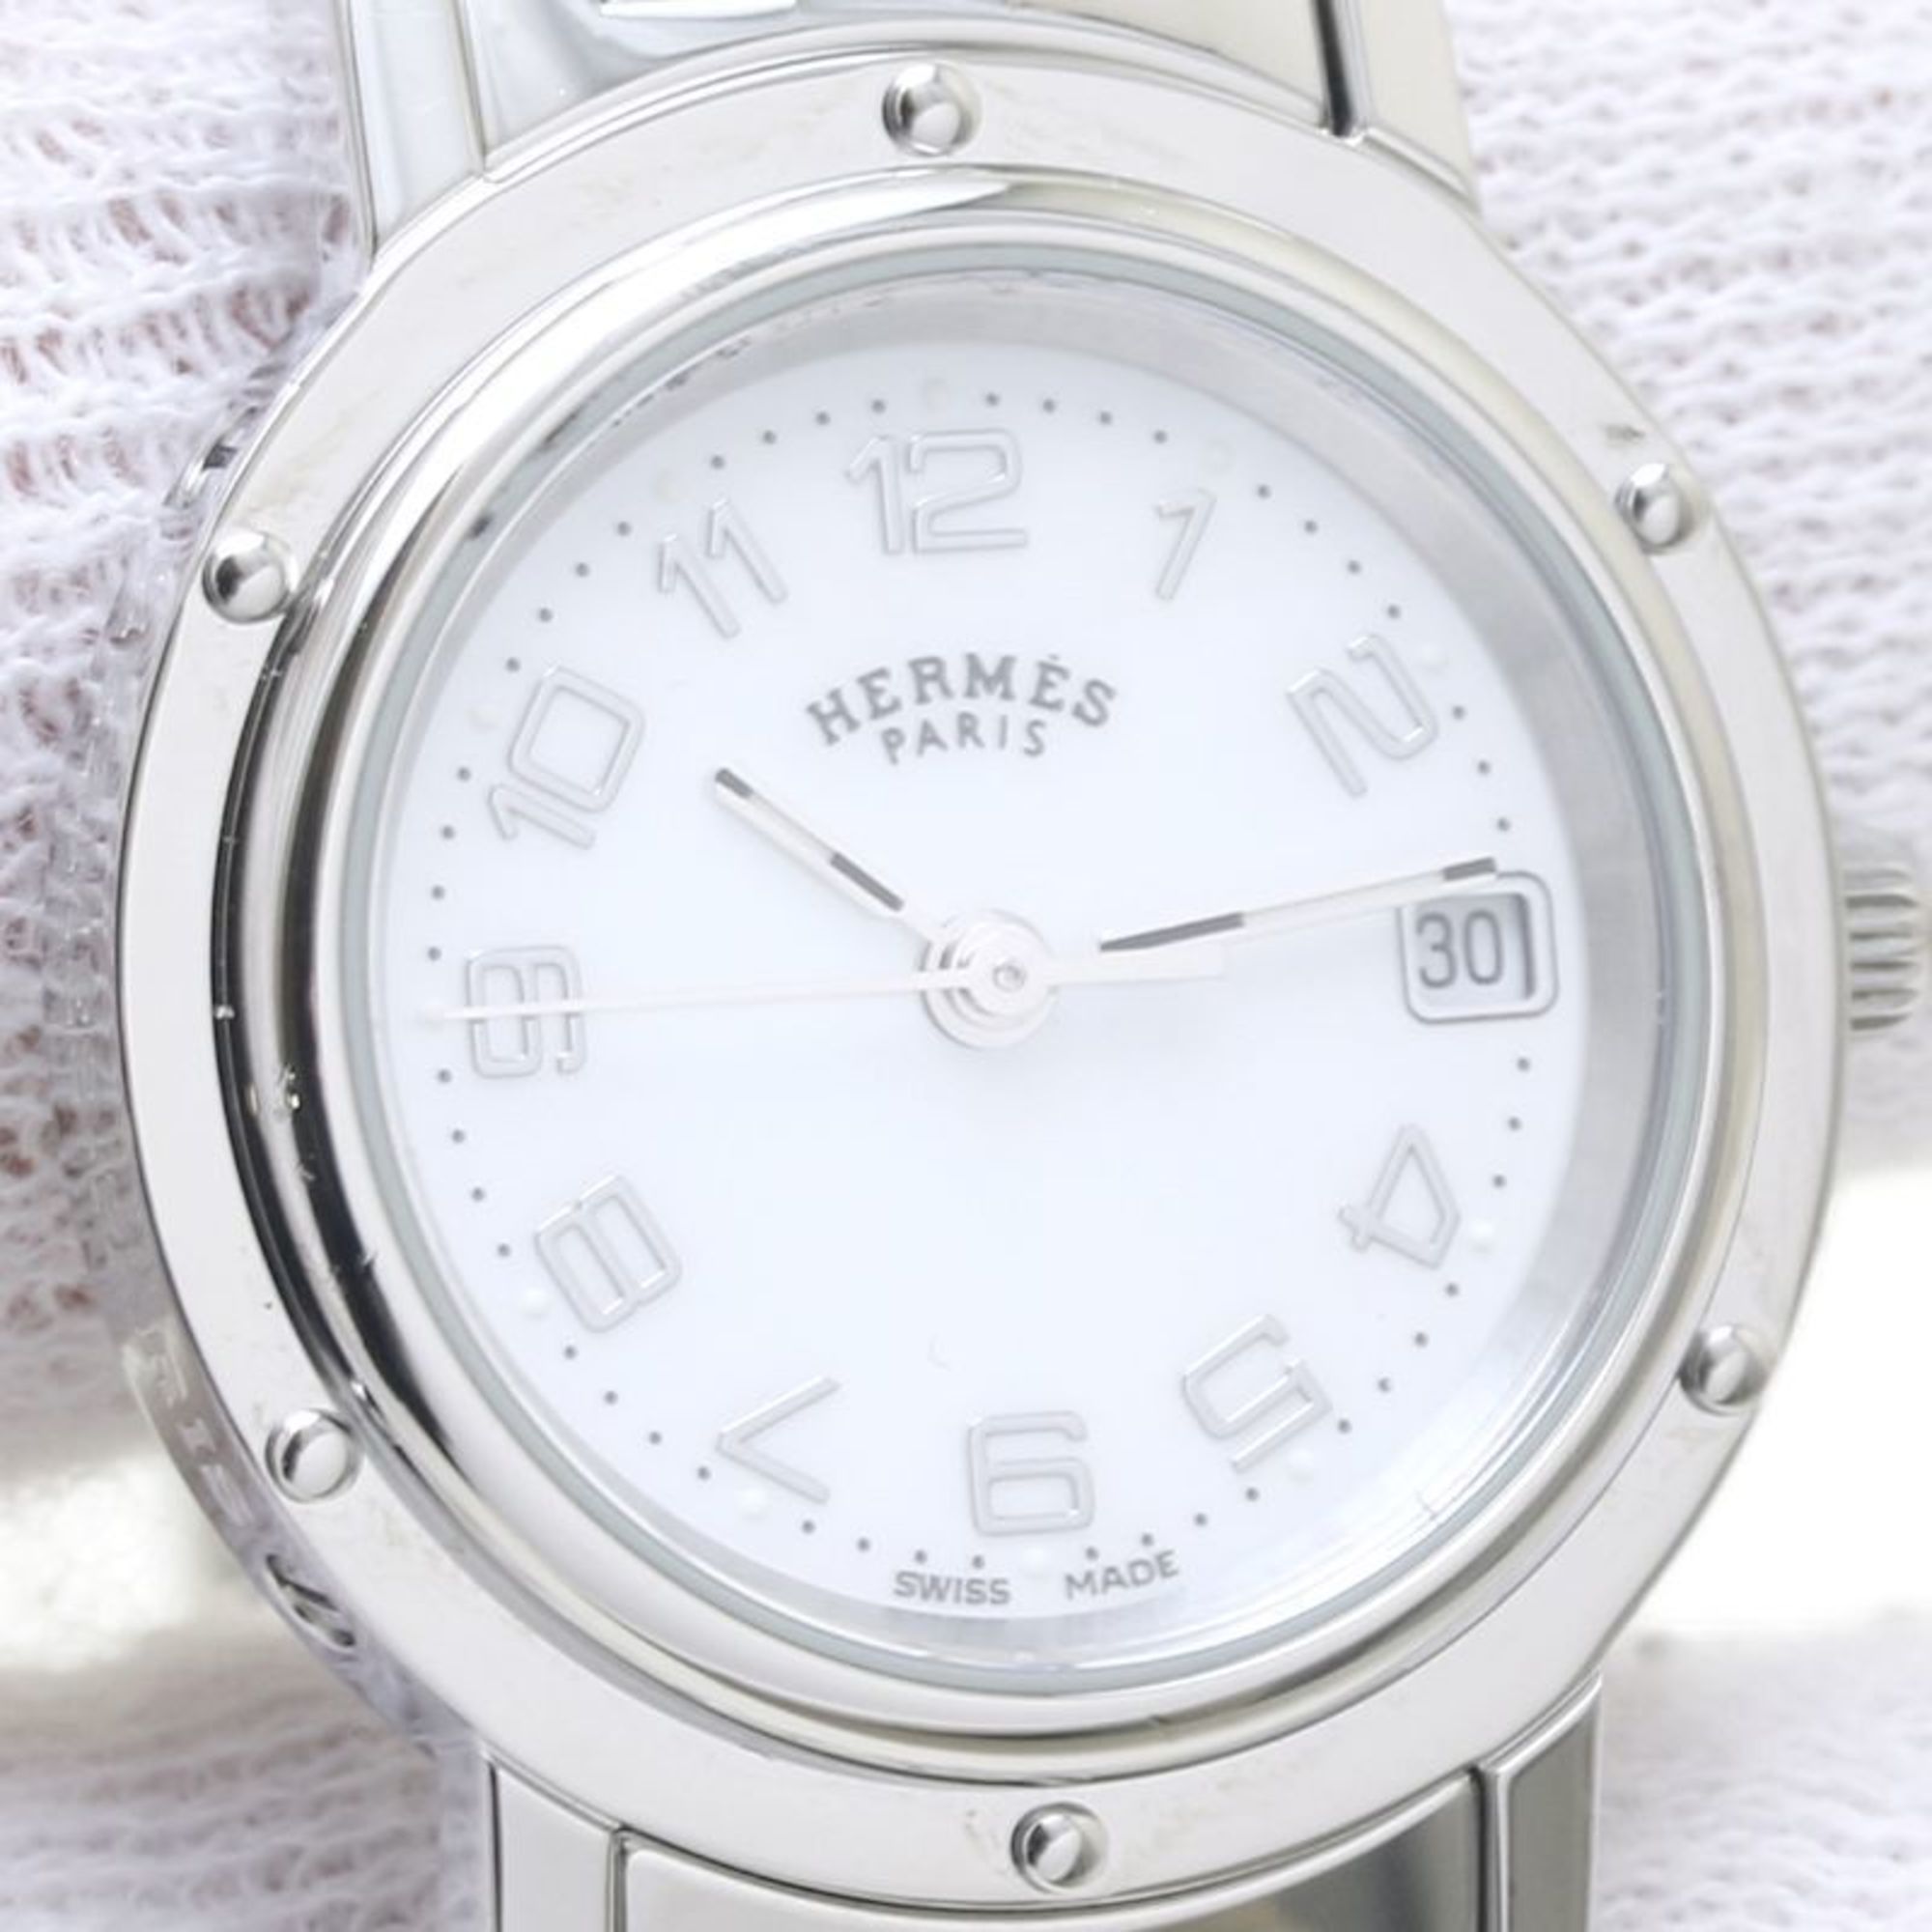 HERMES Clipper Nacre CL4.210.212 3821 New Buckle Stainless Steel Ladies 130097 Watch